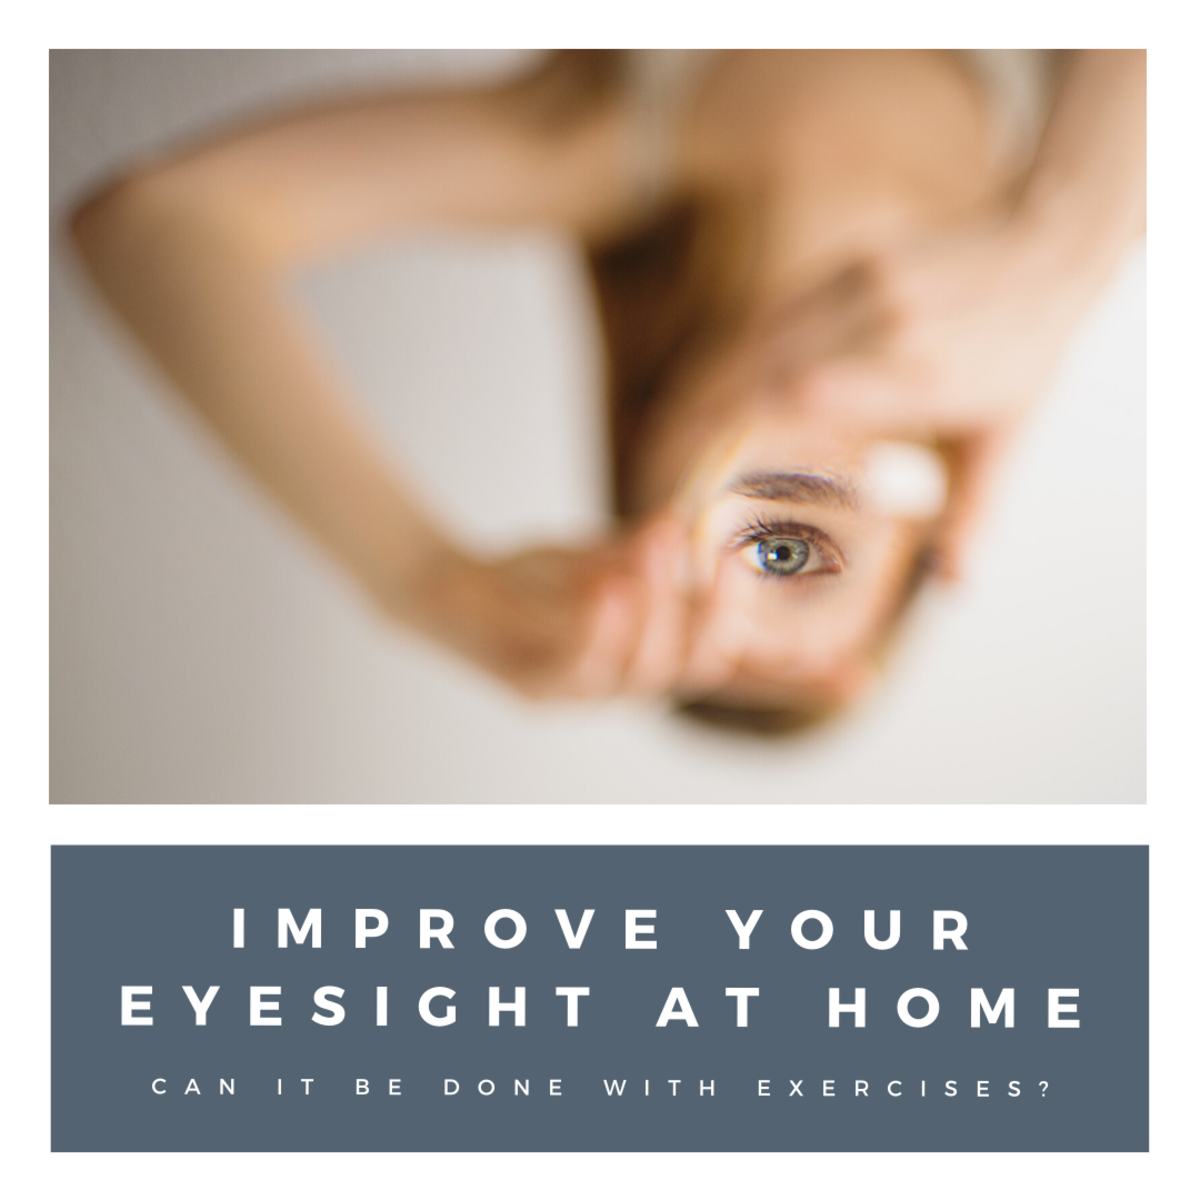 Can You Improve Your Eyes With Exercises?